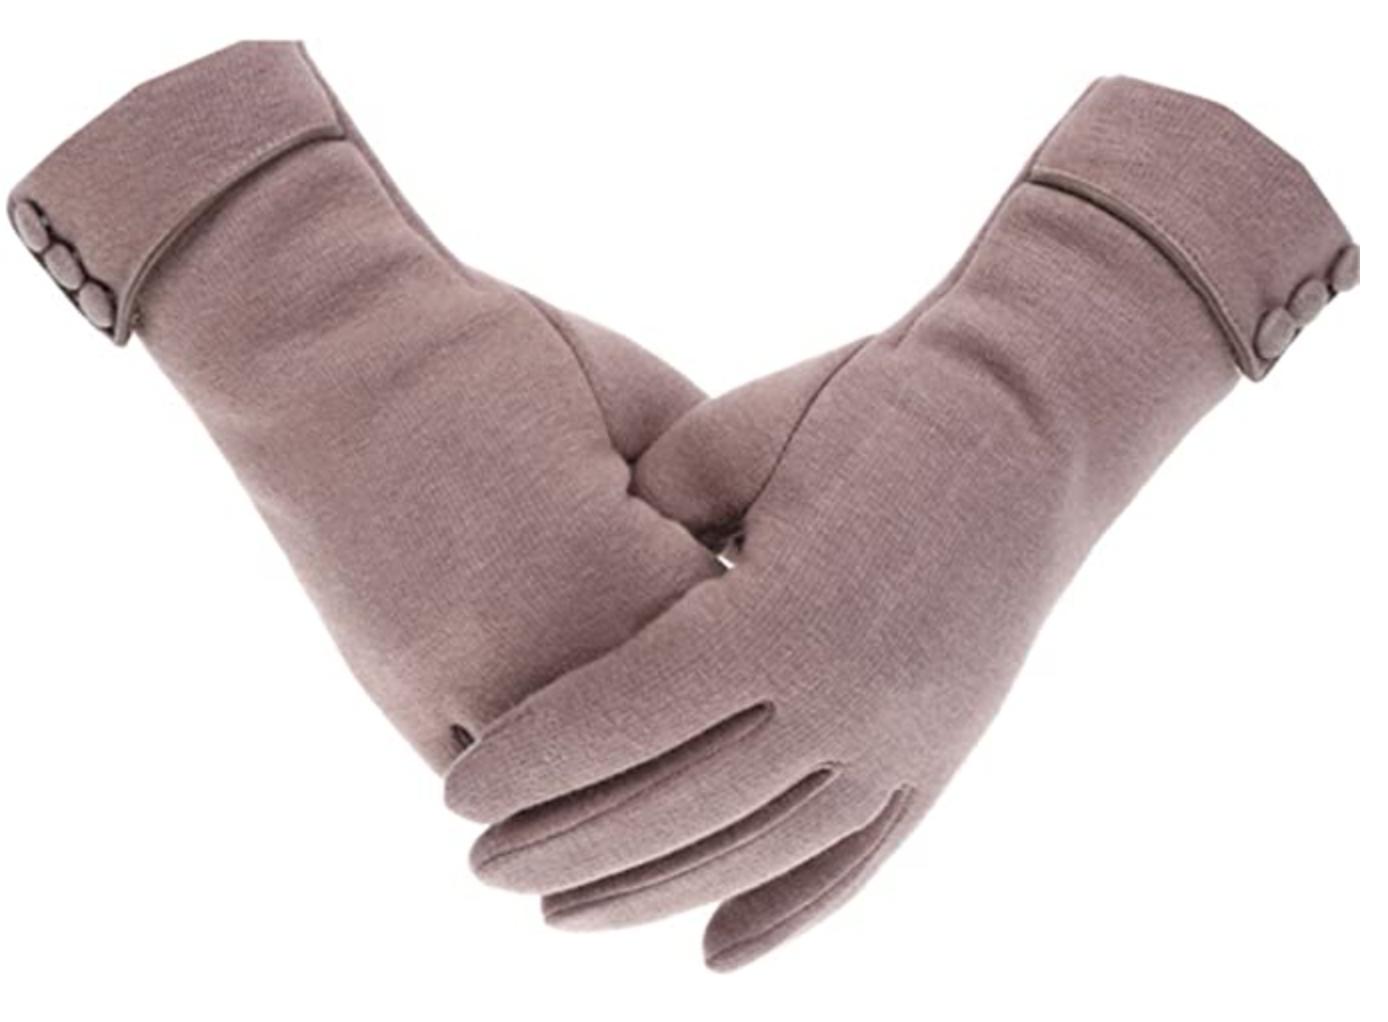 Tomily Womens Touch Screen Fleece Gloves Pink